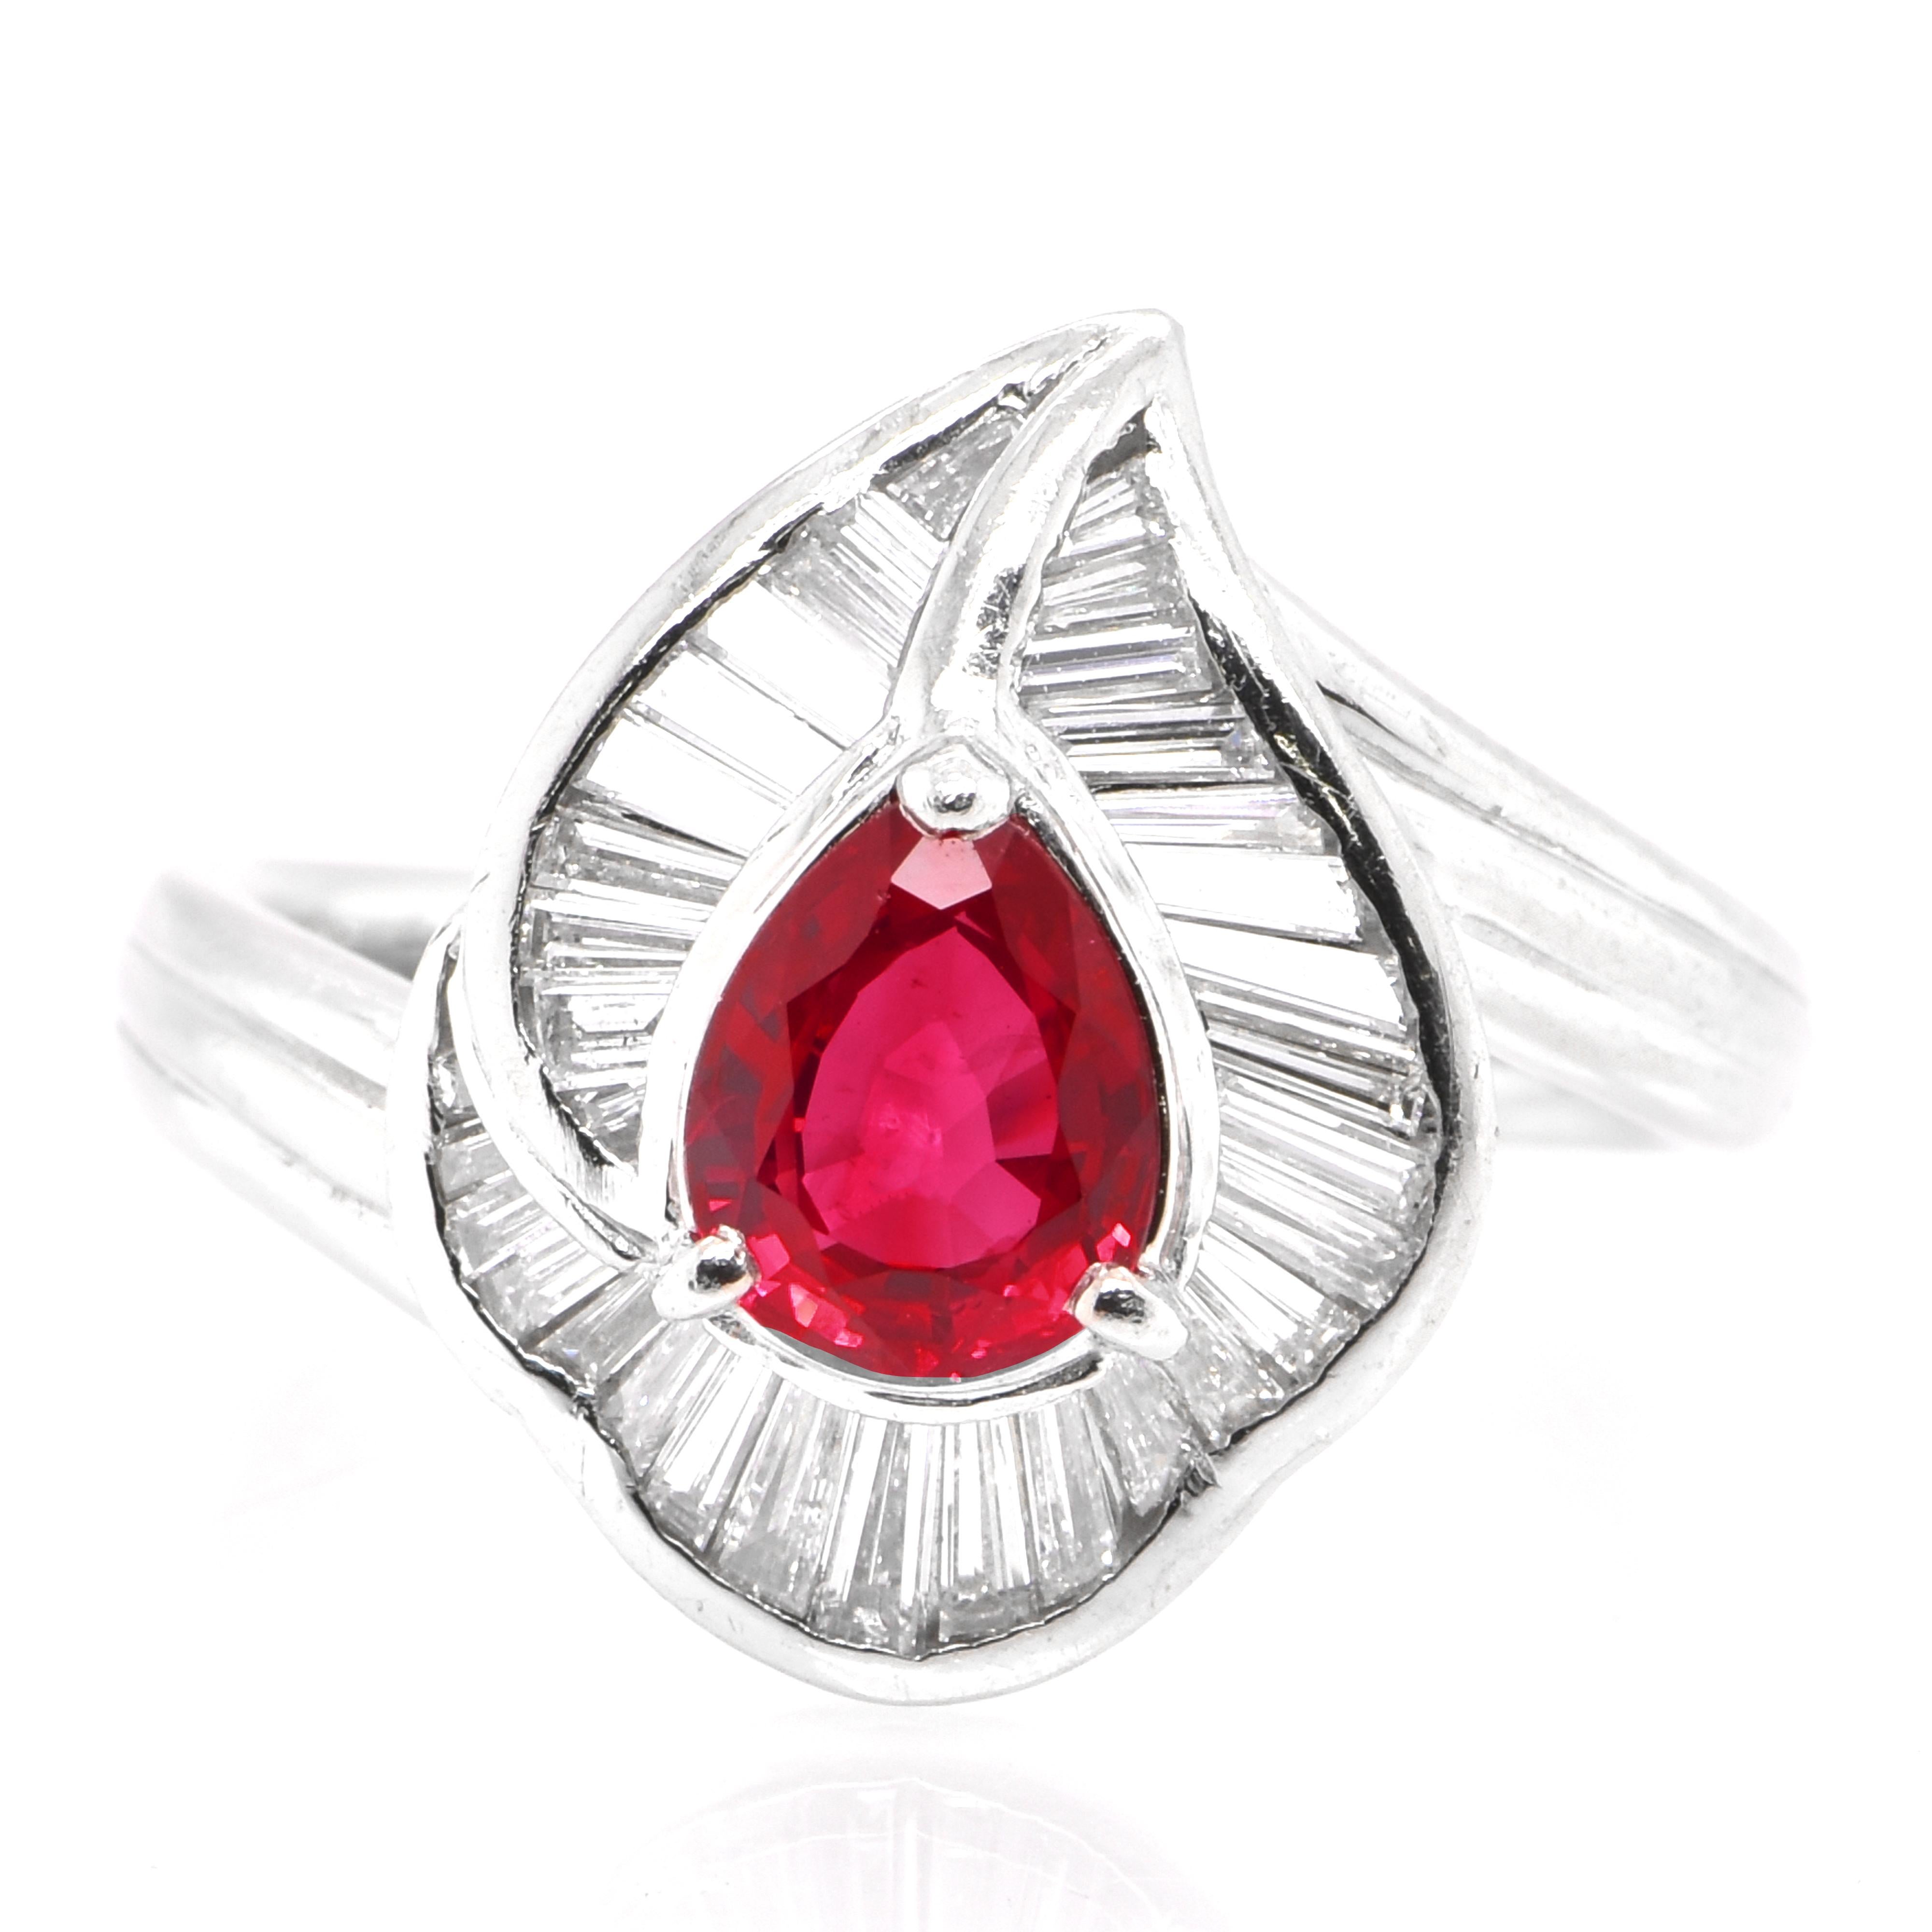 A beautiful ring set in Platinum featuring a 1.01 Carat Natural Ruby and 0.48 Carat Diamonds. Rubies are referred to as 